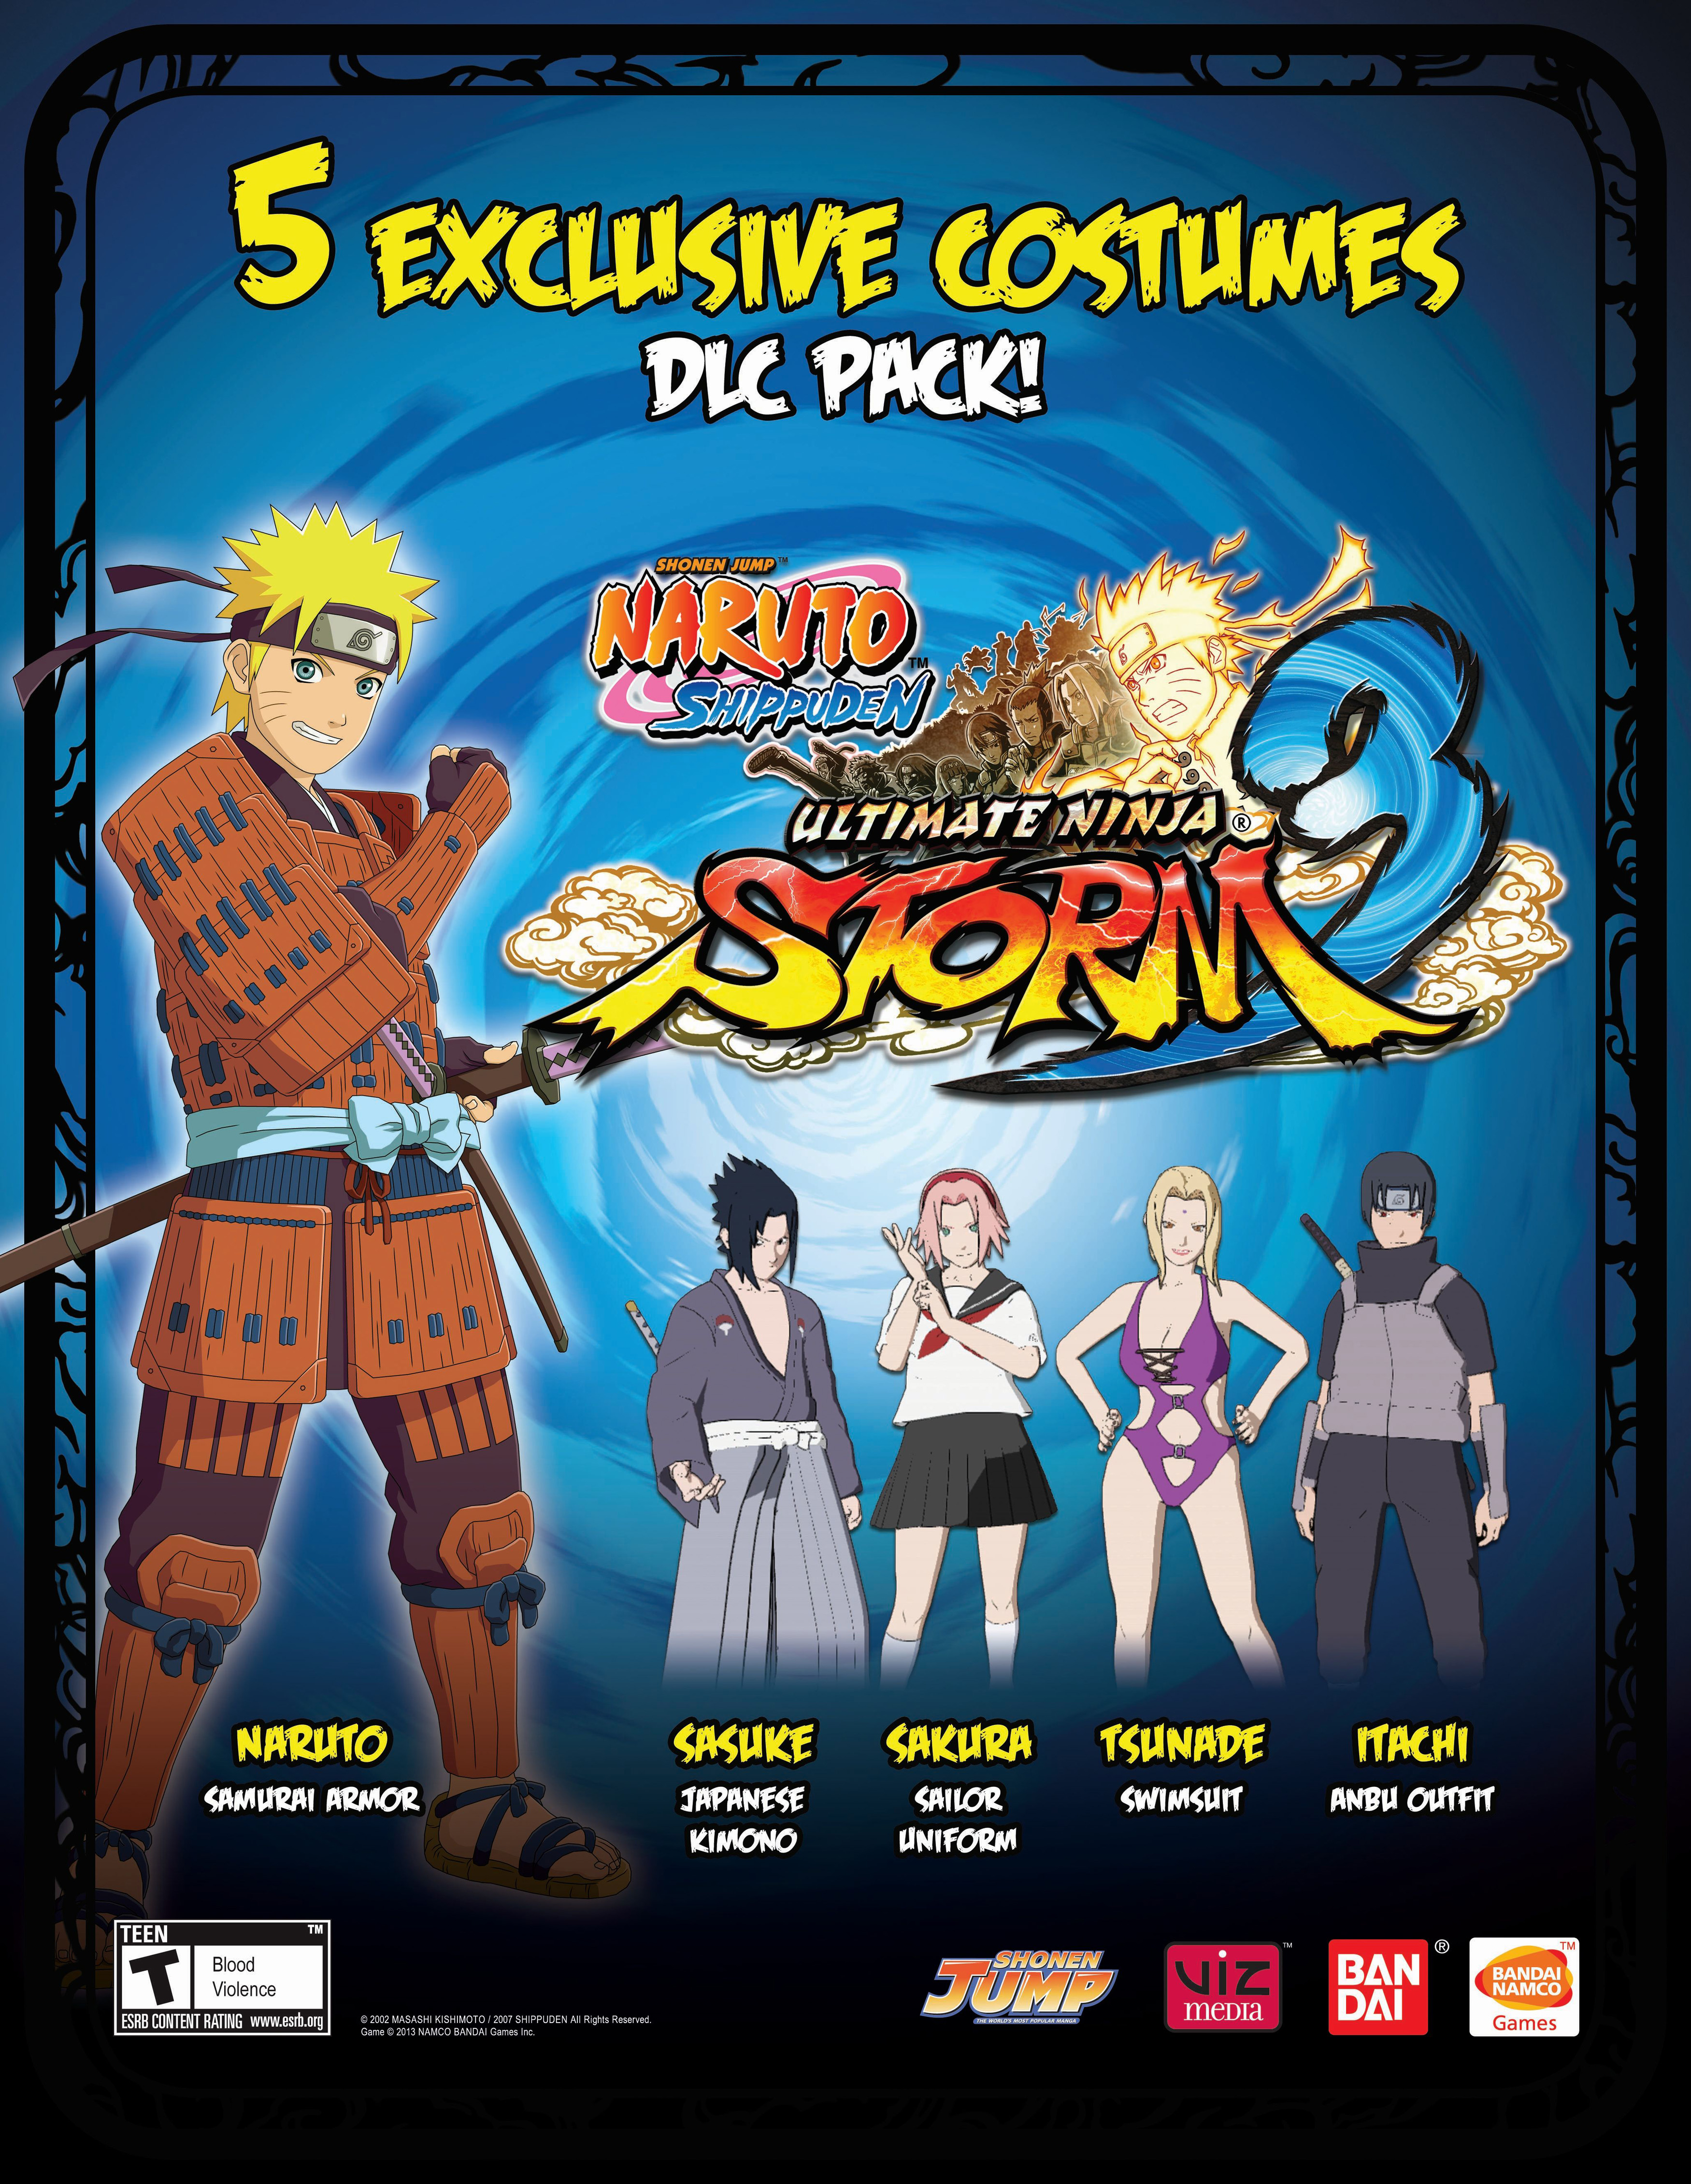 Naruto Shippuden: Ultimate Ninja Storm 3 Backgrounds, Compatible - PC, Mobile, Gadgets| 3500x4520 px